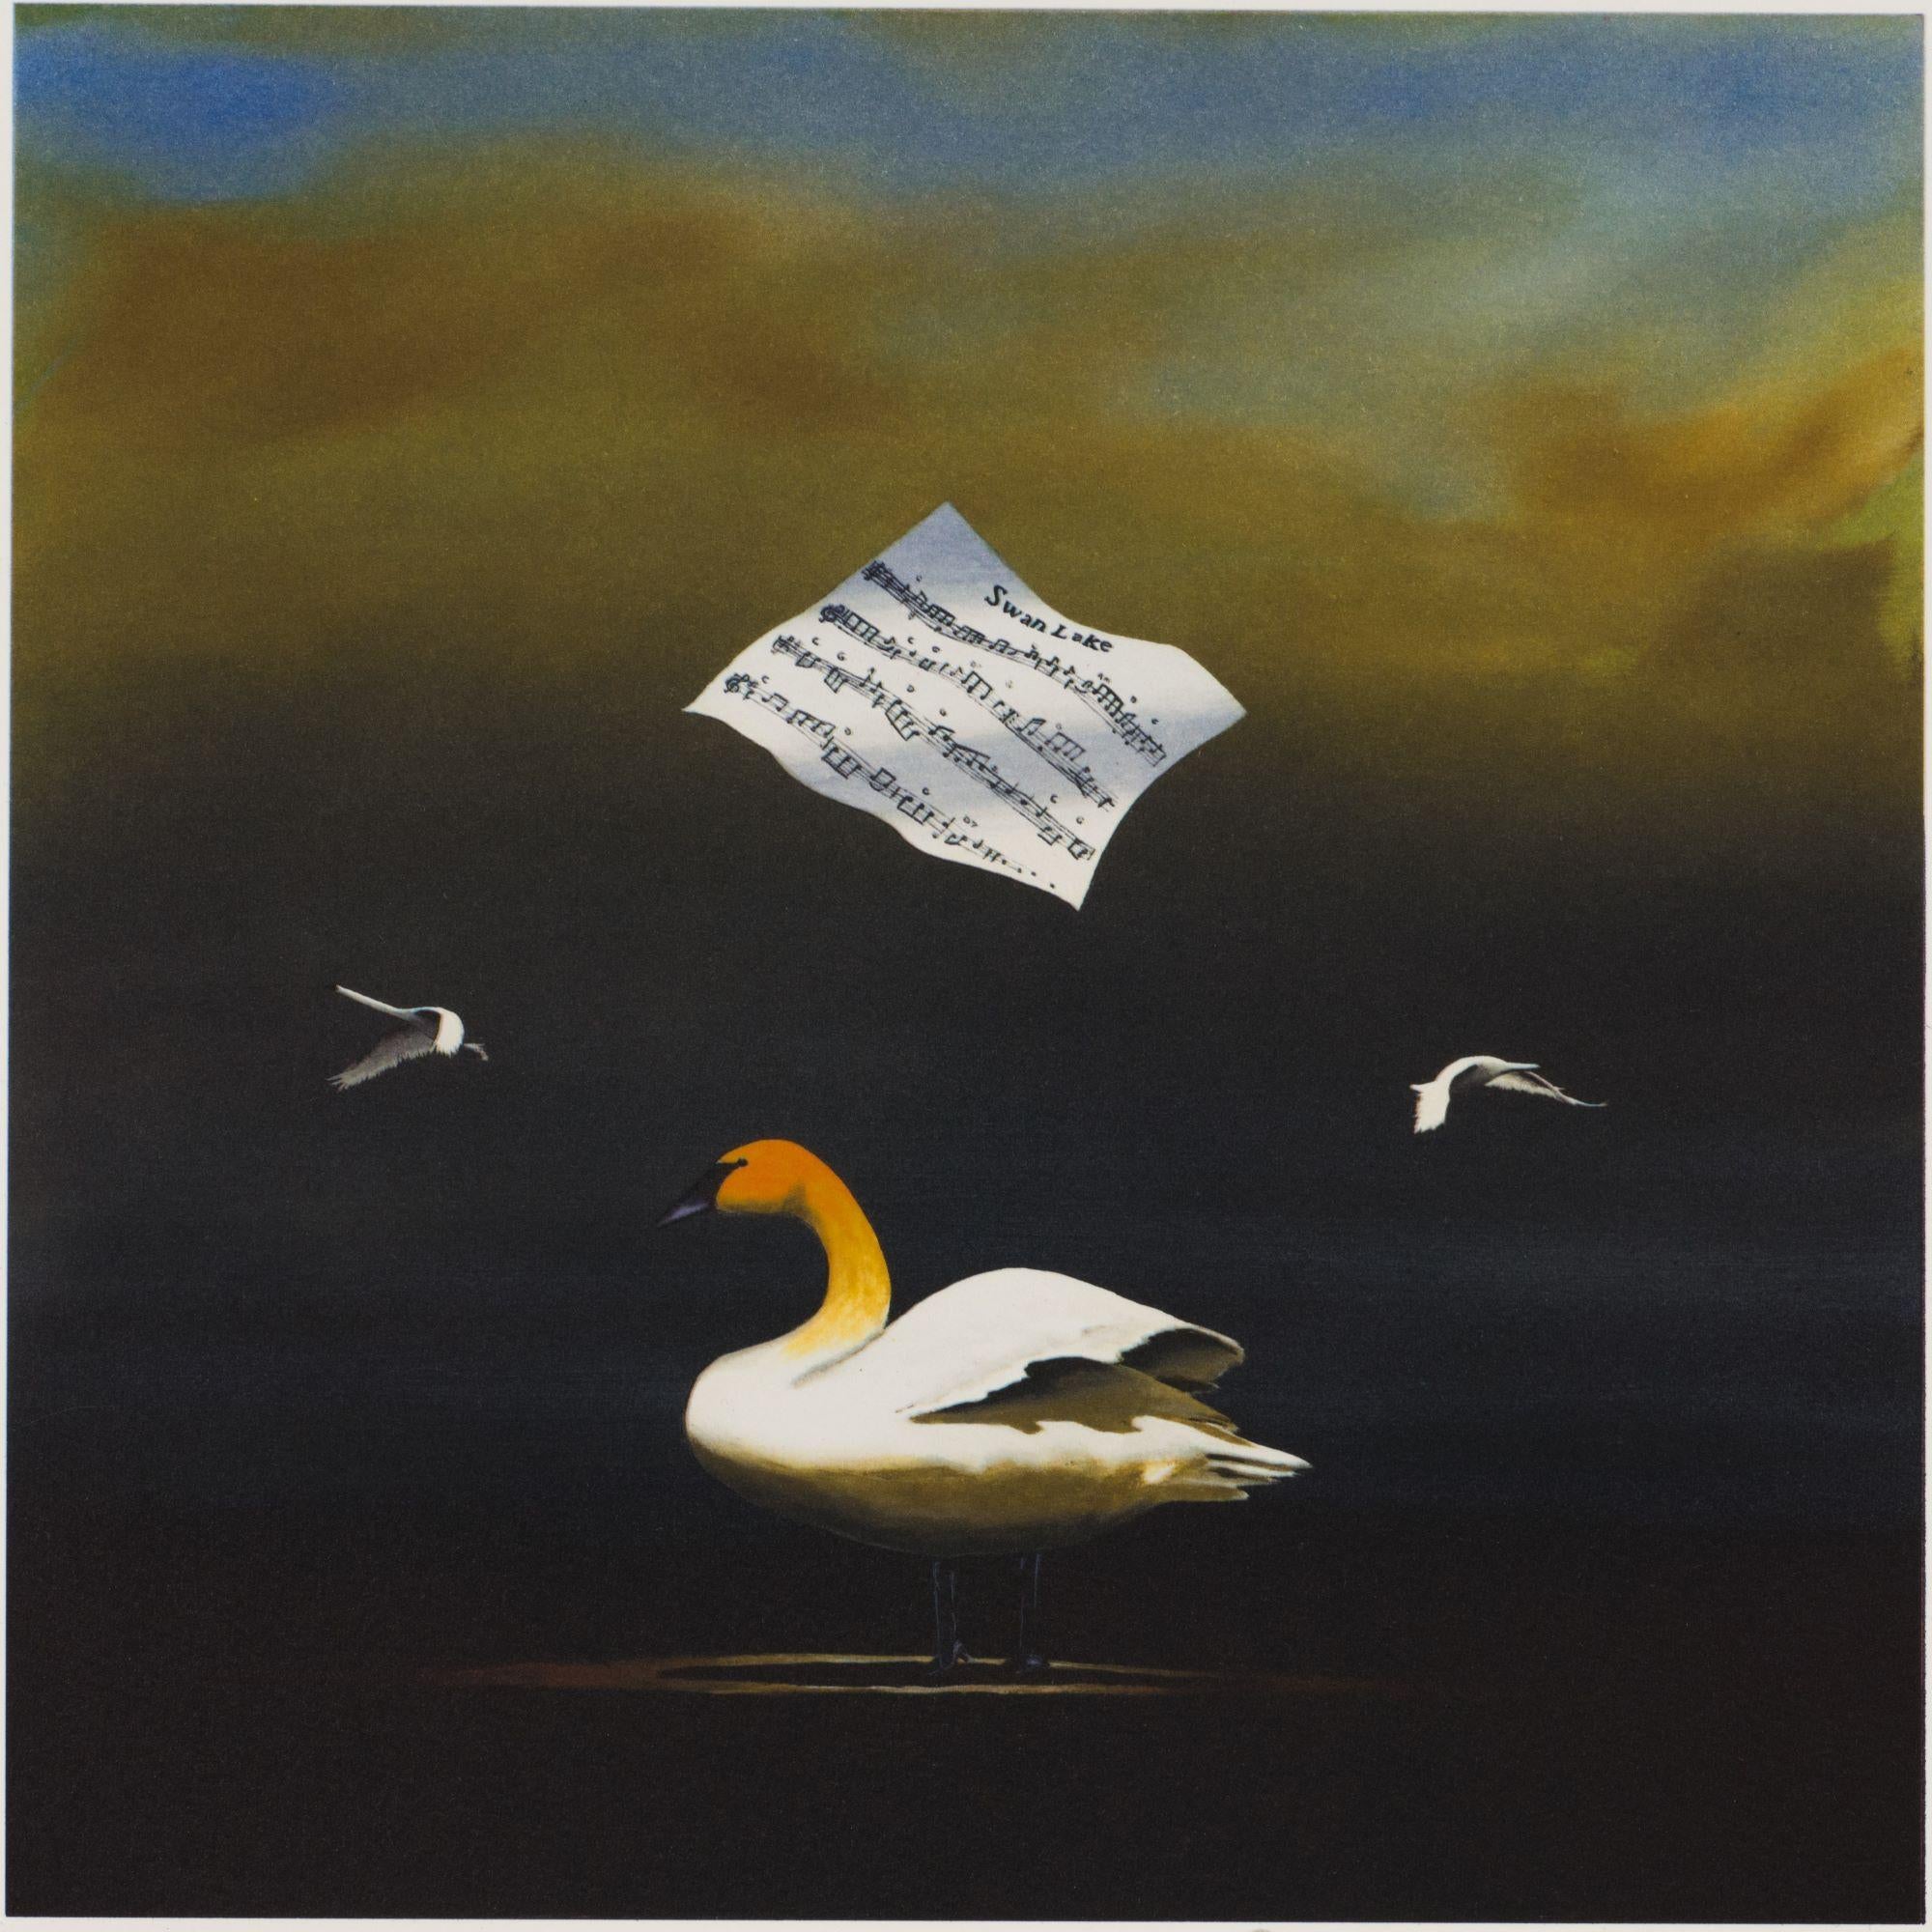 The Swan Song  - Contemporary Print by Robert Deyber 